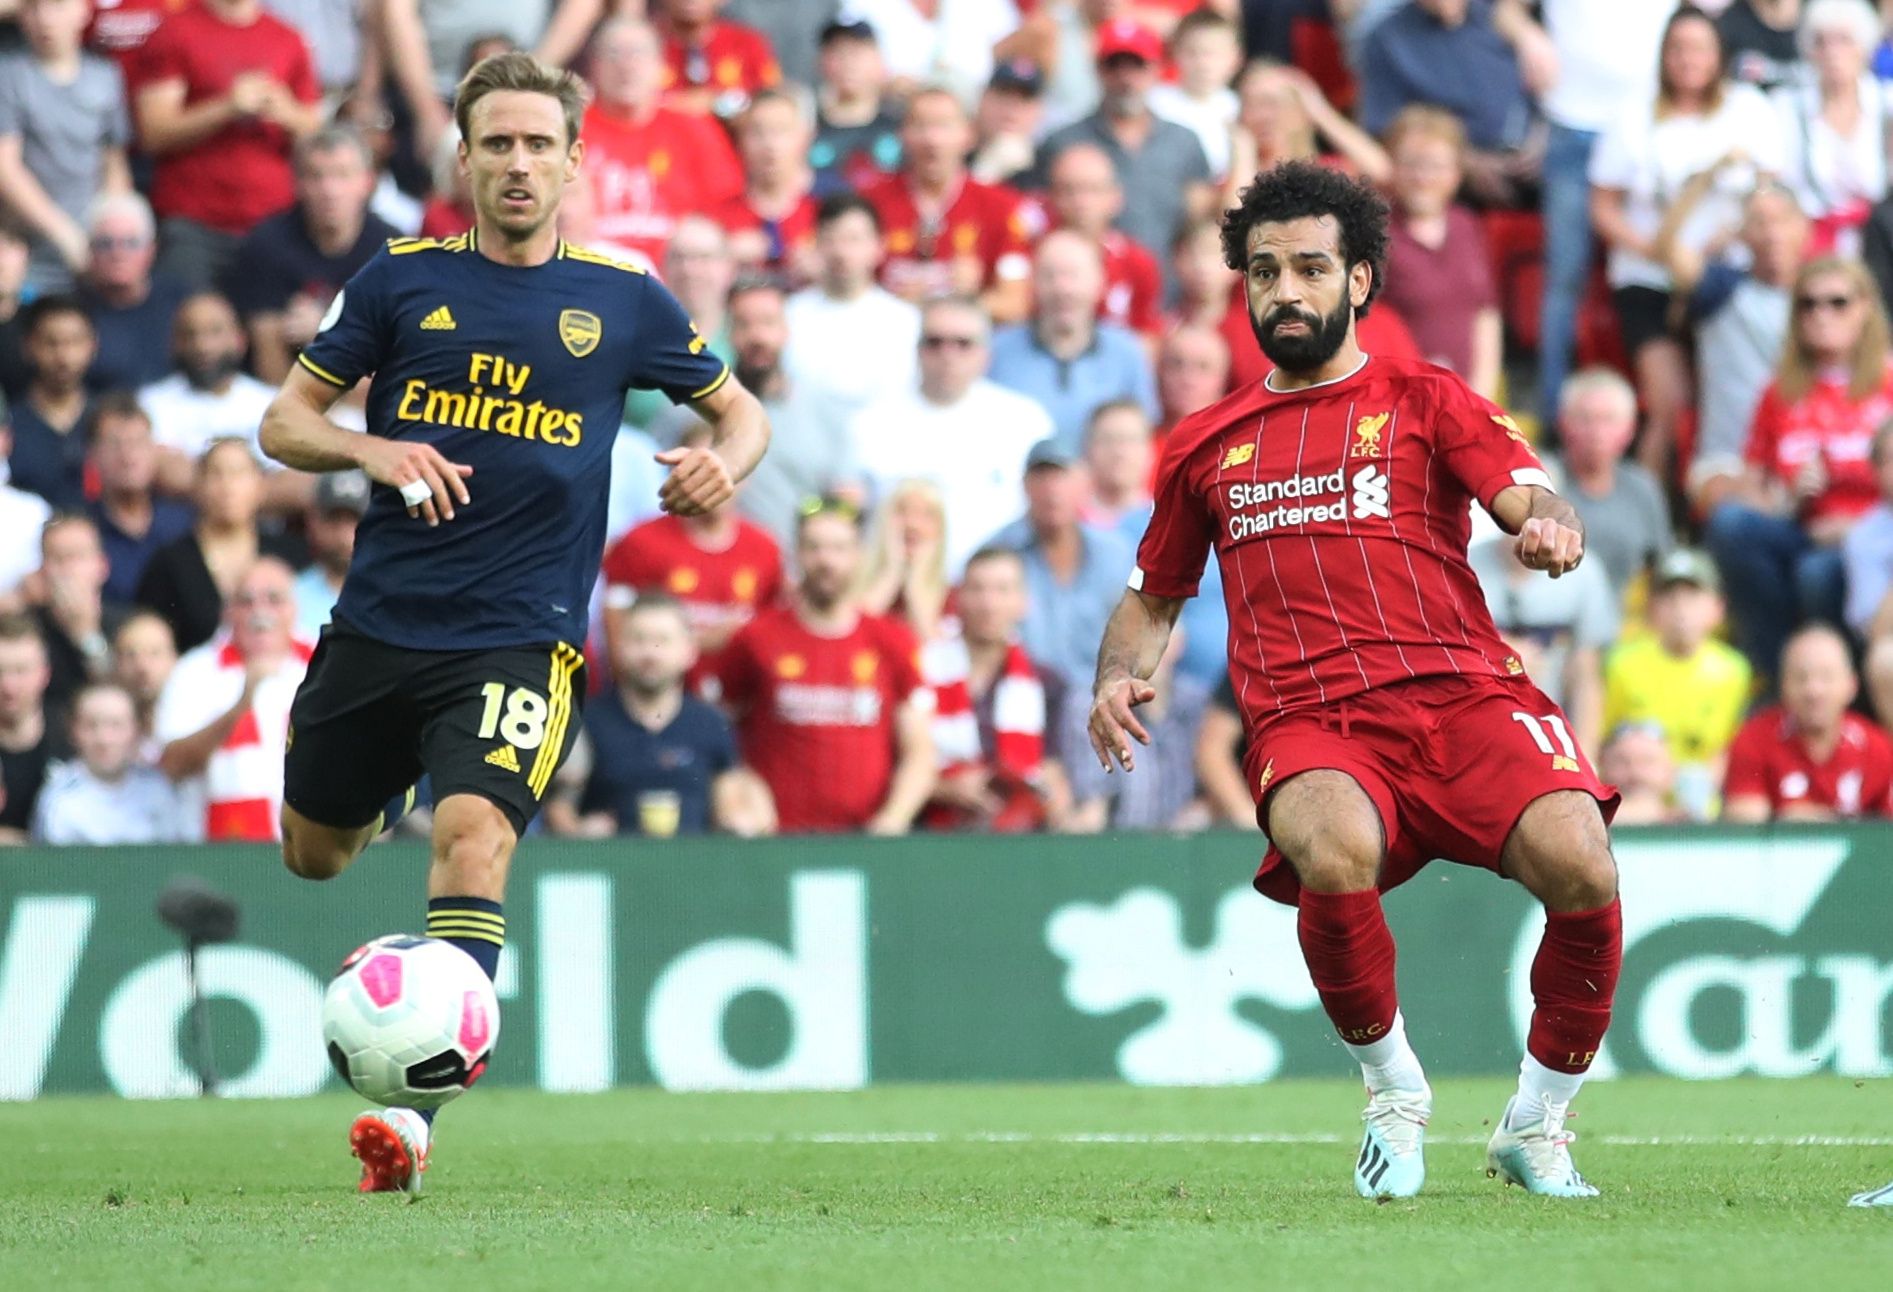 Soccer Football - Premier League - Liverpool v Arsenal - Anfield, Liverpool, Britain - August 24, 2019  Liverpool's Mohamed Salah scores their third goal  Action Images via Reuters/Carl Recine  EDITORIAL USE ONLY. No use with unauthorized audio, video, data, fixture lists, club/league logos or 